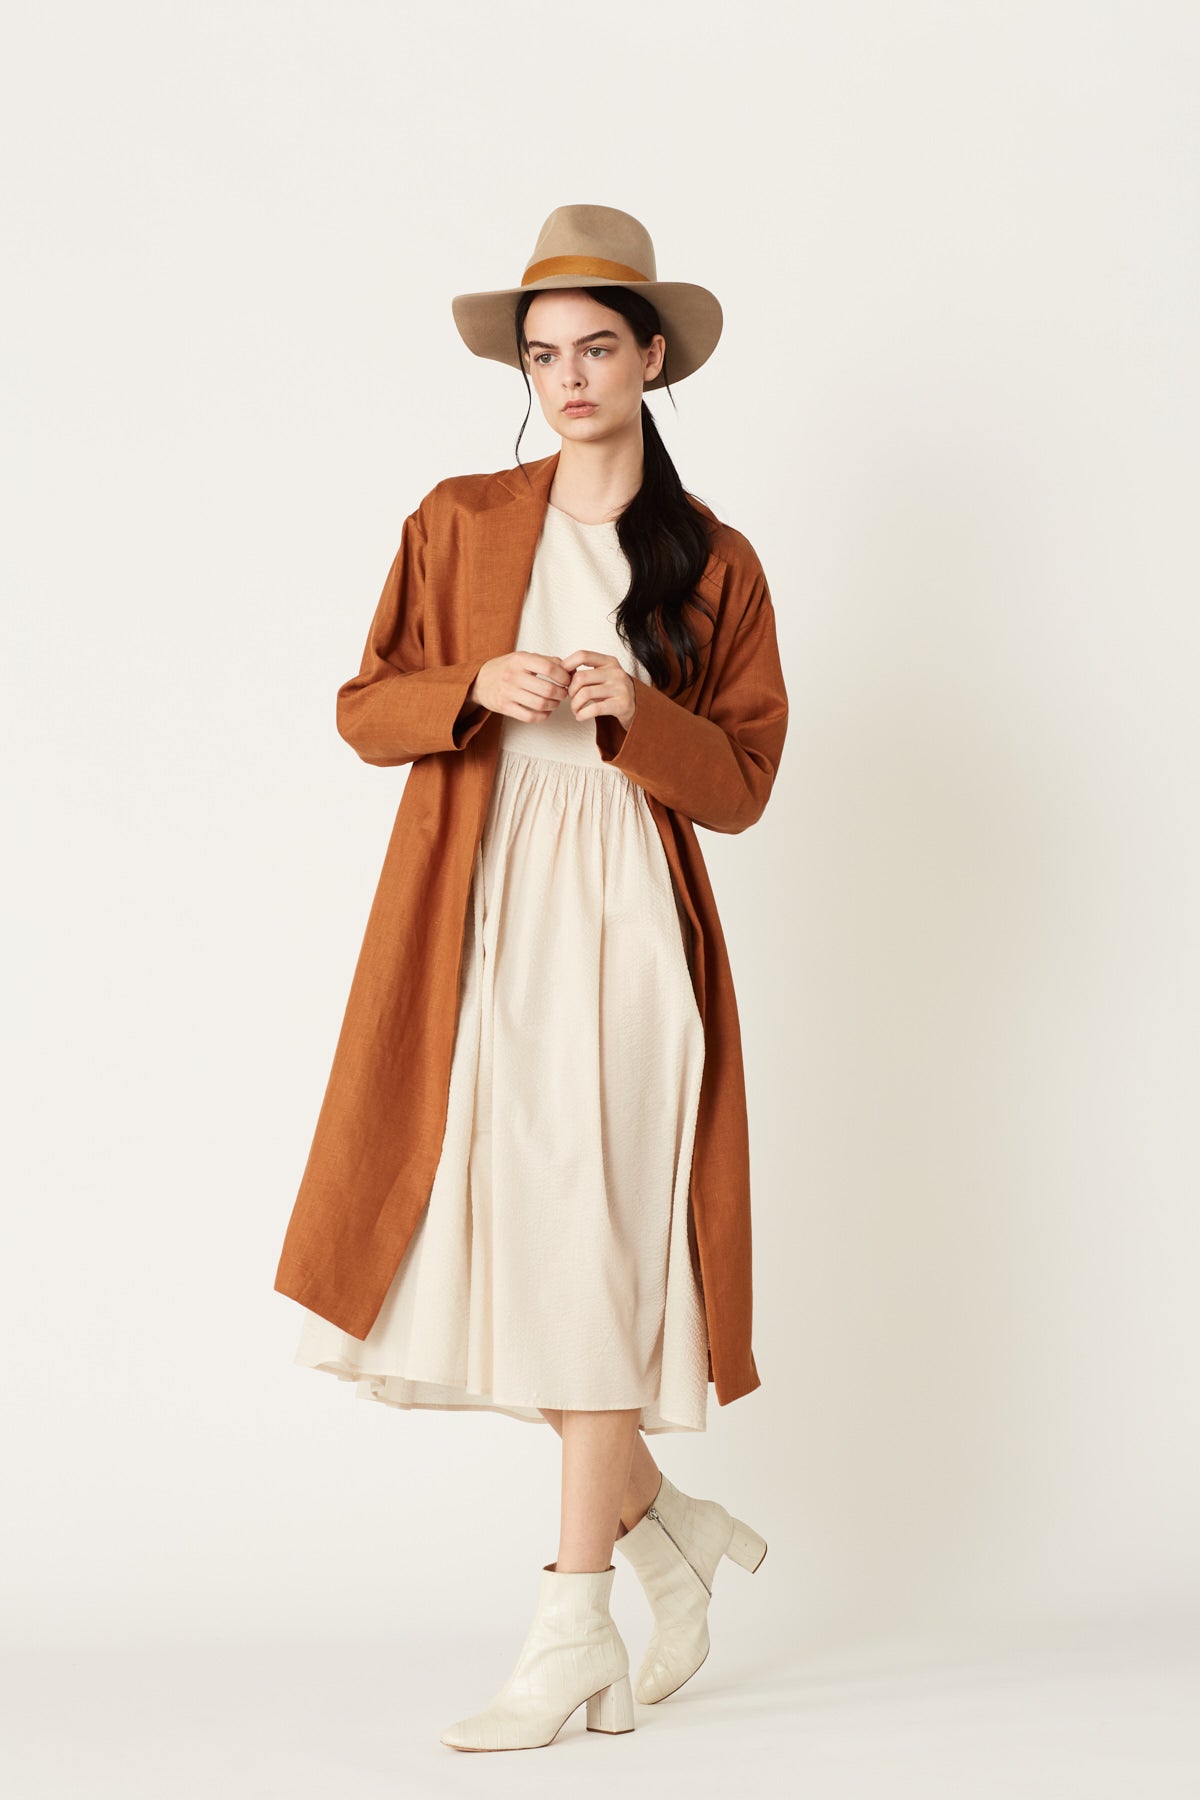 Ms. Rosalee Linen Long Sleeve Coat in Ocre Linen. Made in Atlanta, ethically and sustainably, by slow fashion designer Megan Huntz. 